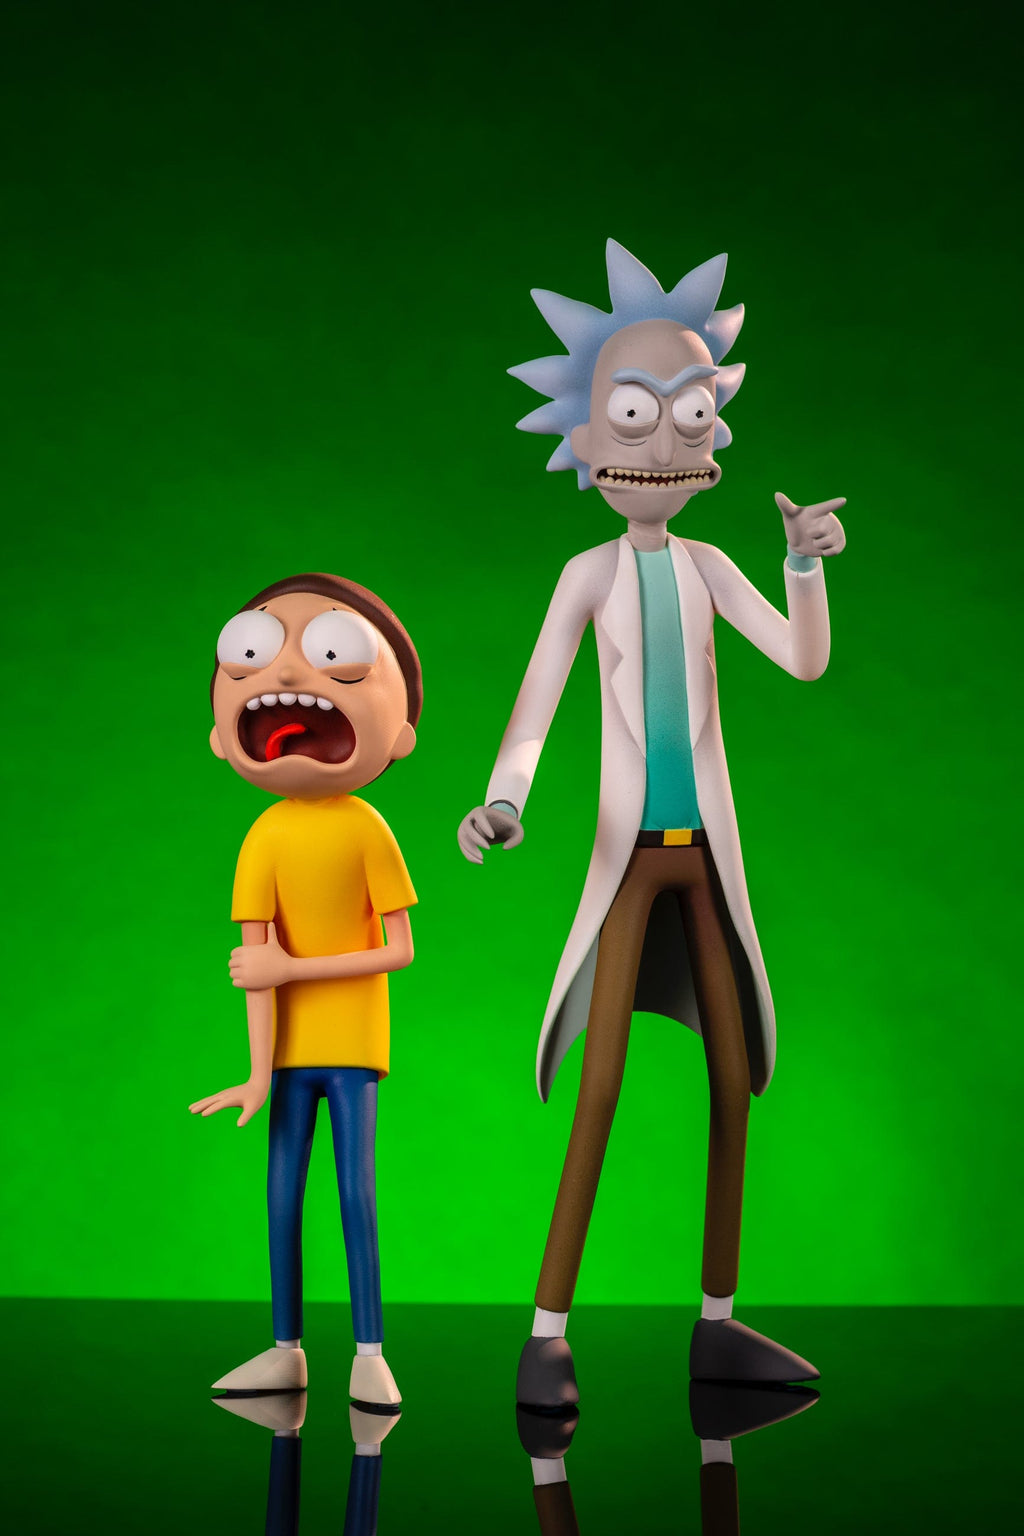 rick and morty action figures set